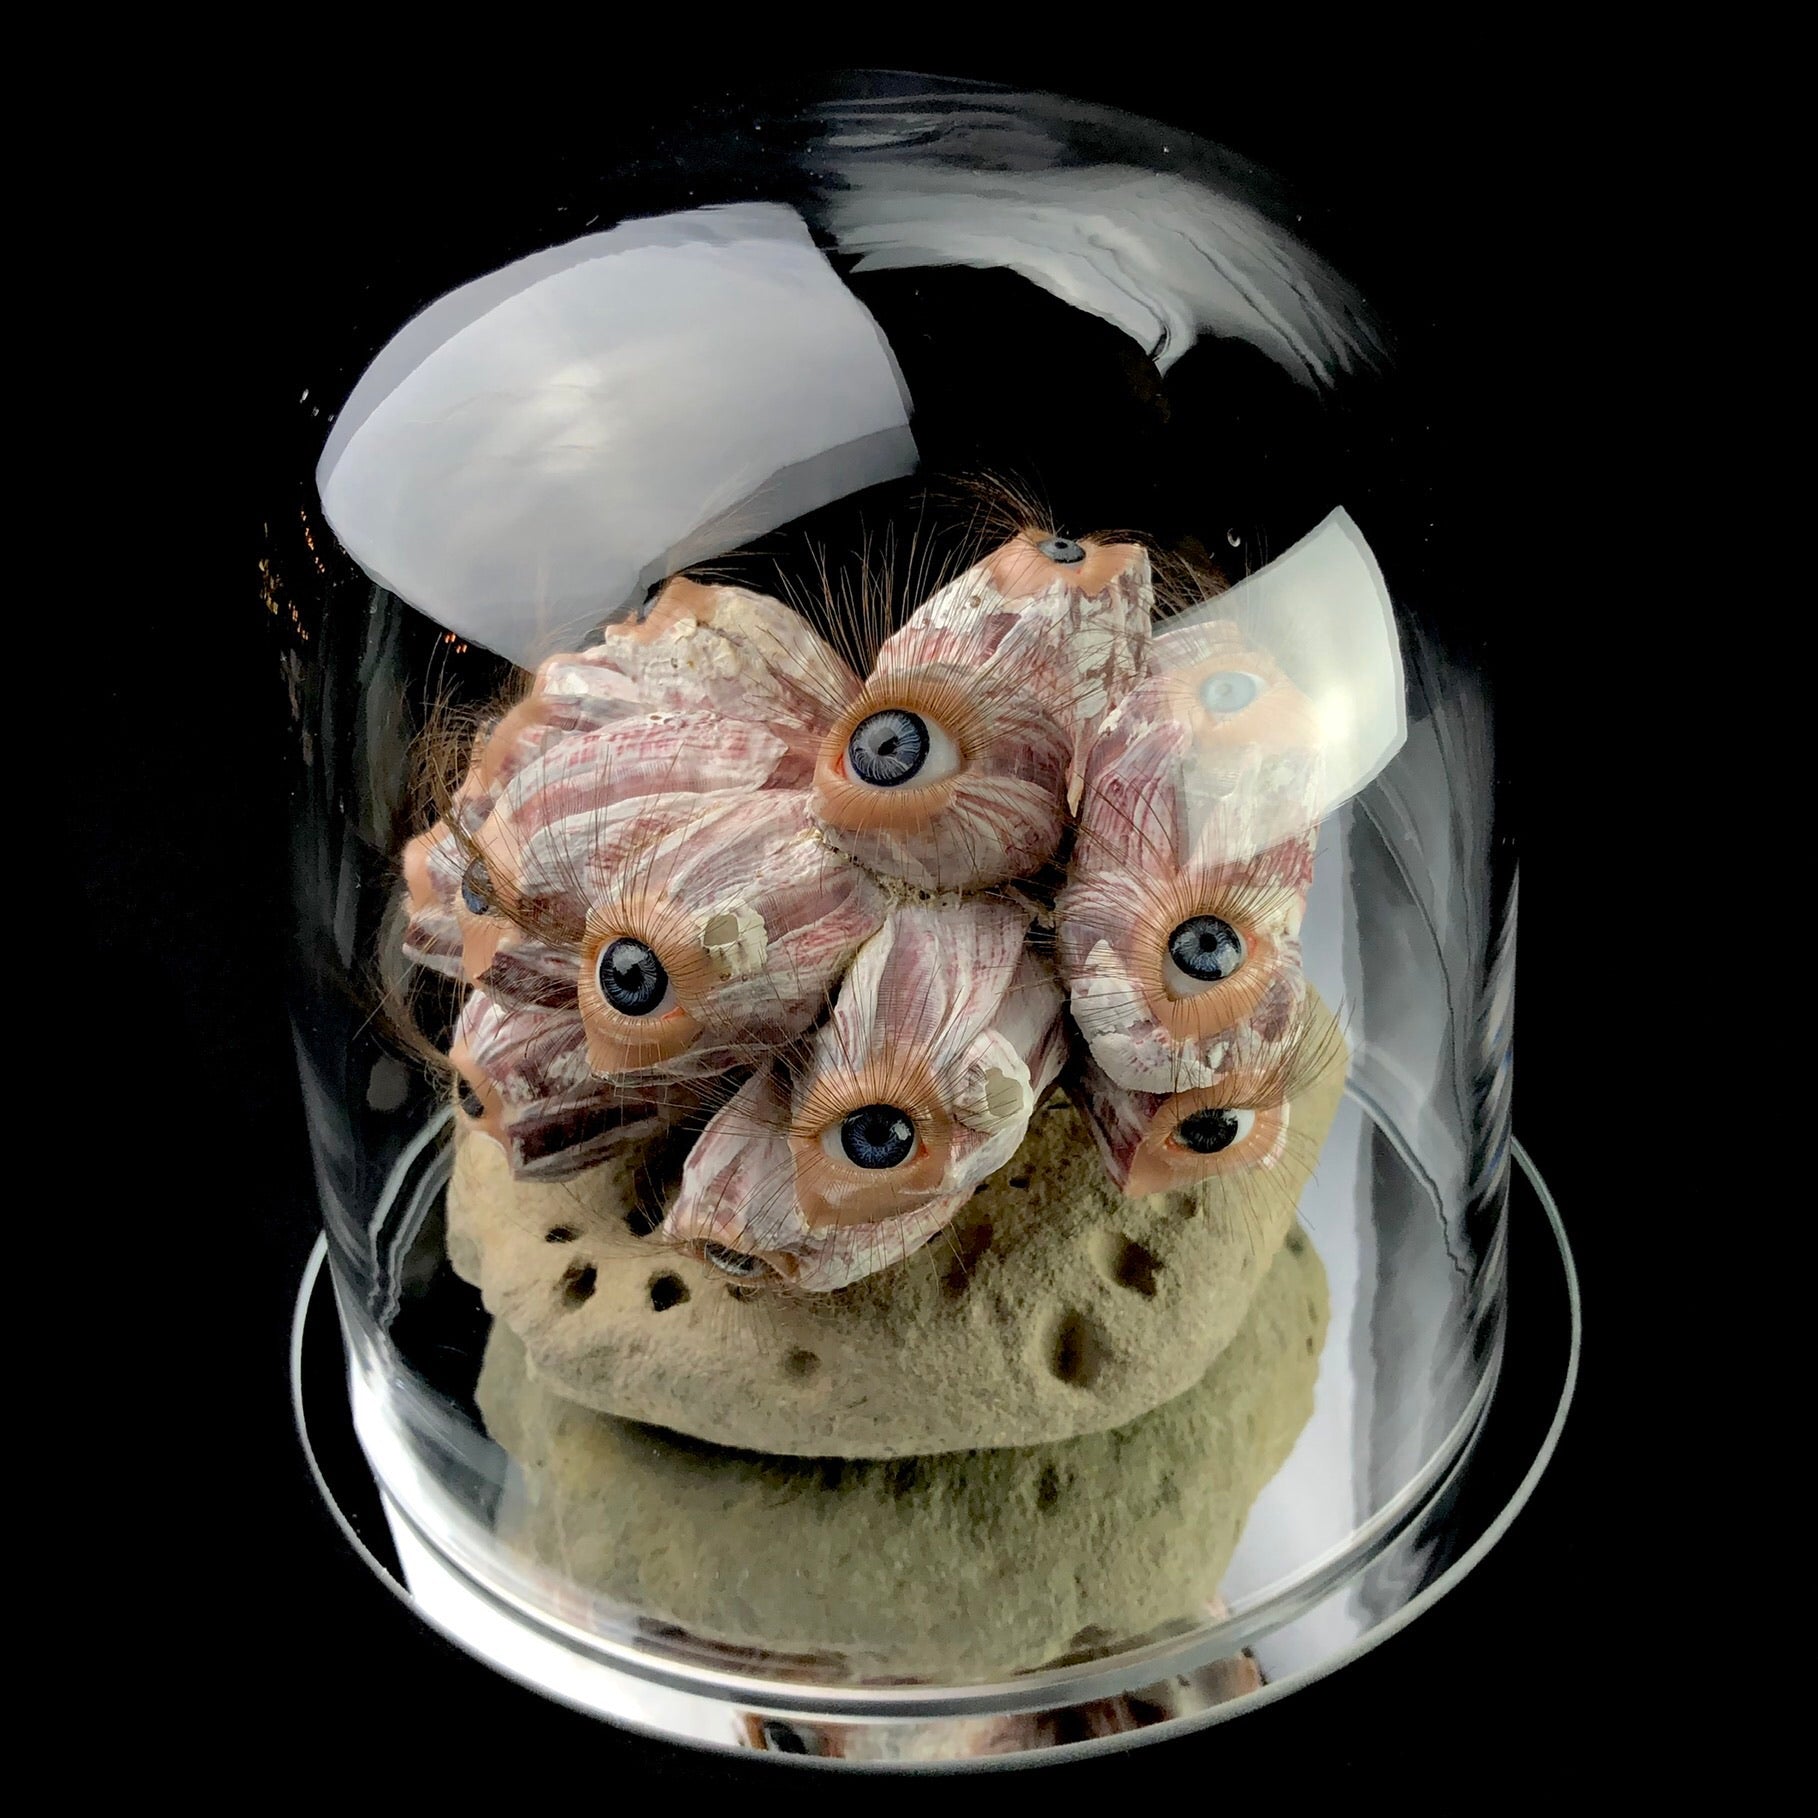 Side view of Curious Barnacle sculpture with glass dome and mirrored coaster